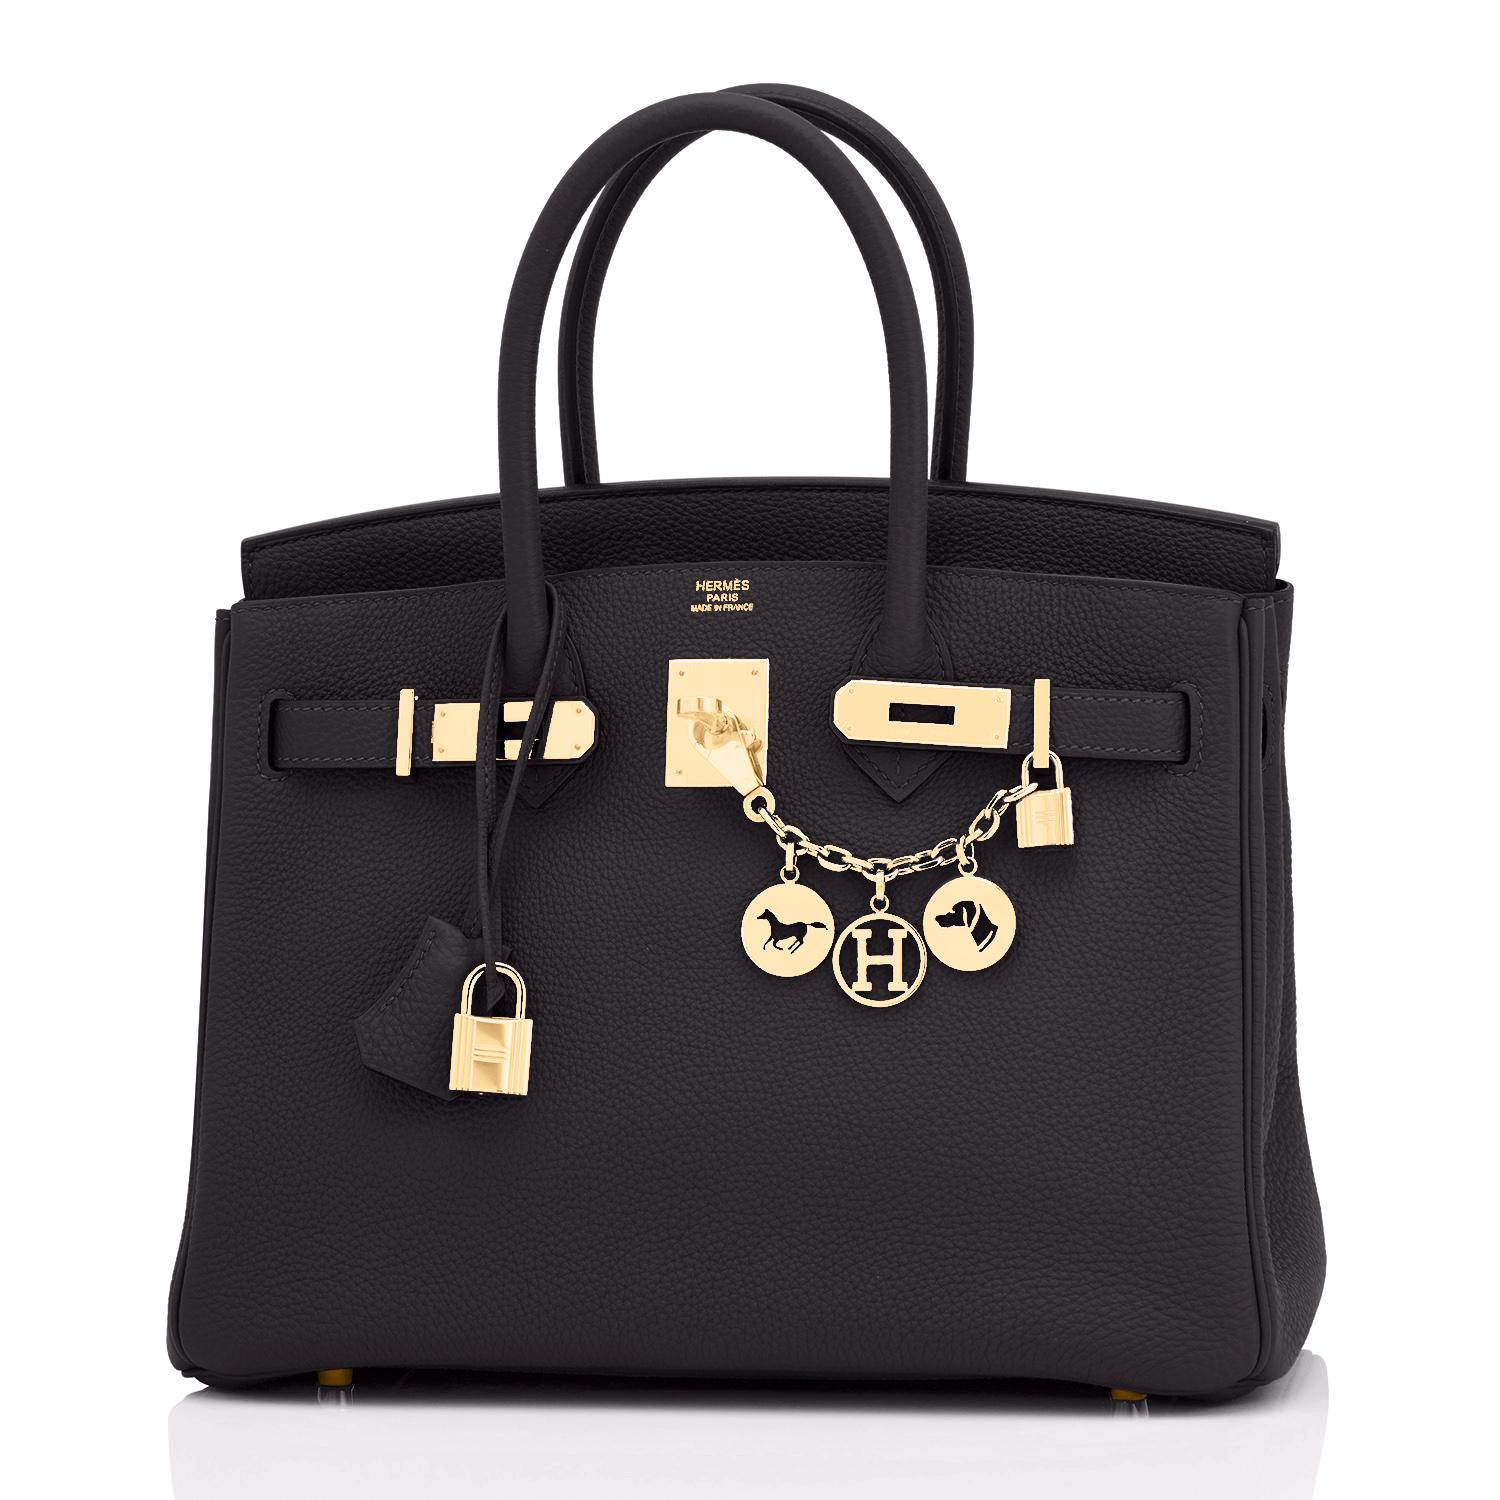 Hermes Birkin 30cm Black Togo Gold Hardware Bag Y Stamp, 2020
Brand New in Box. Store Fresh. Pristine Condition (with plastic on hardware)
Just purchased from Hermes store; bag bears new 2020 interior Y stamp! 
Perfect gift! Comes with lock, keys,